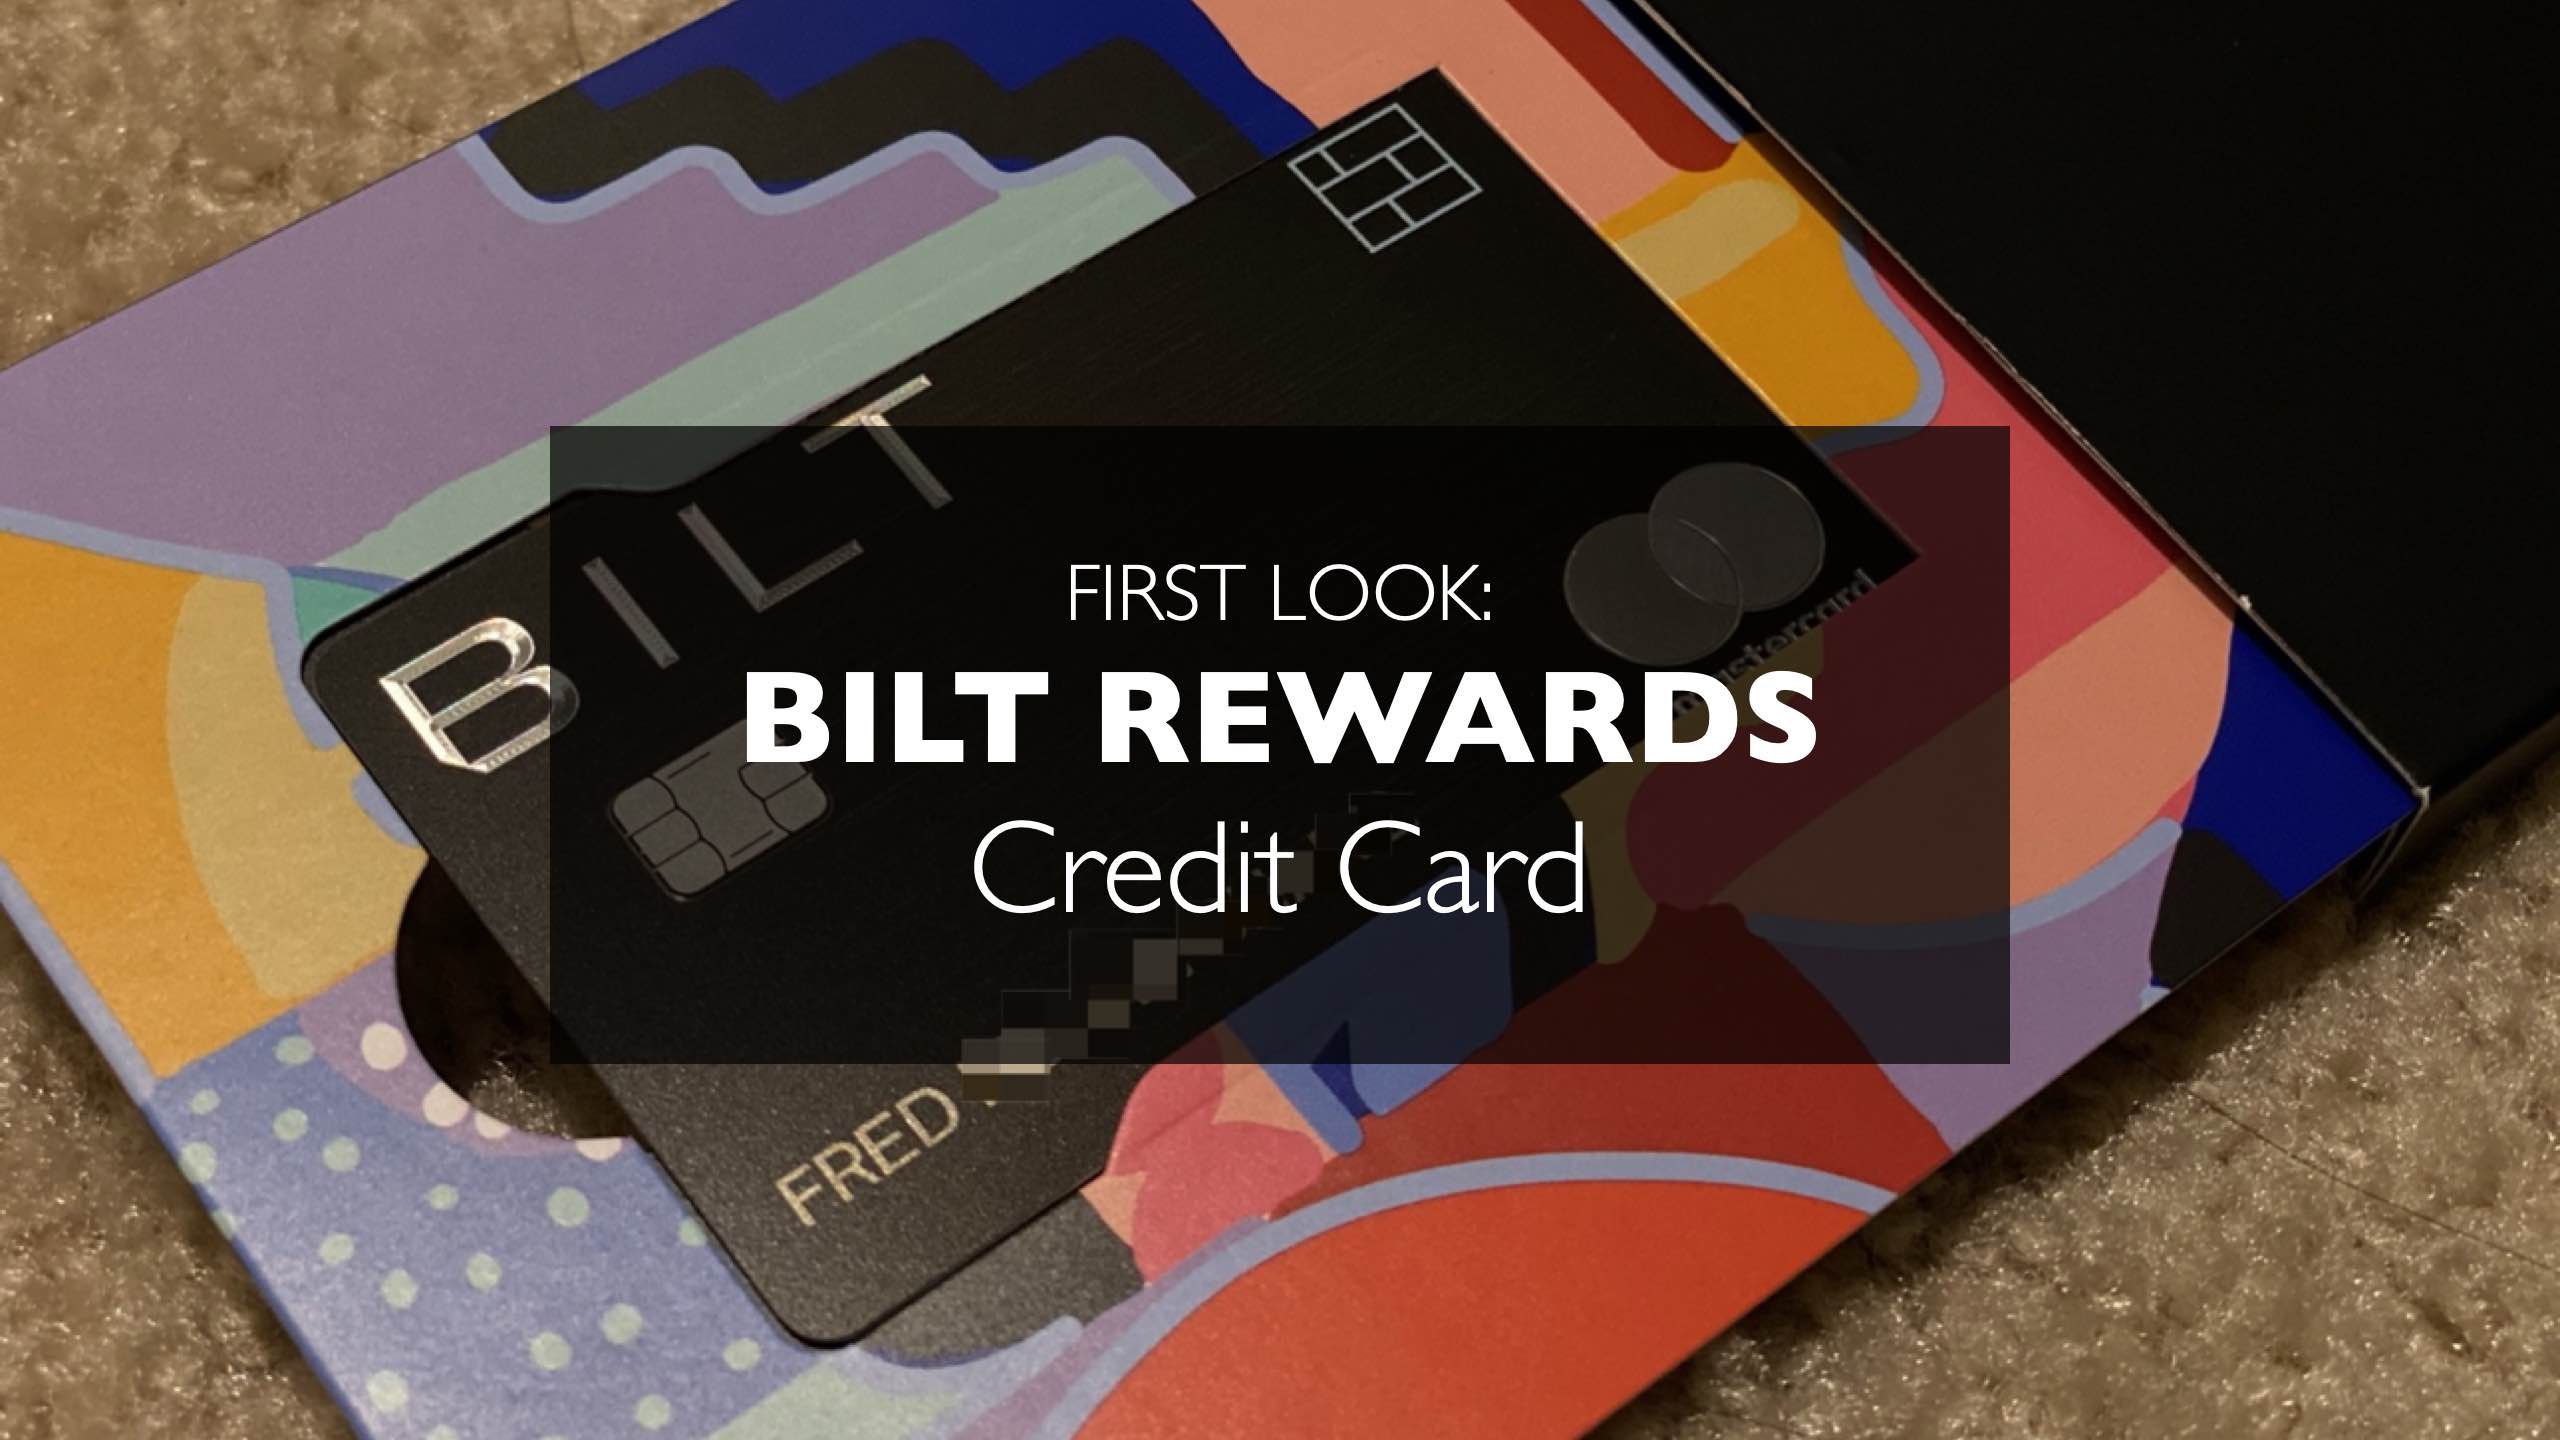 First Look: BILT Rewards Credit Card – Easiest Way To Earn Points Paying Rent?